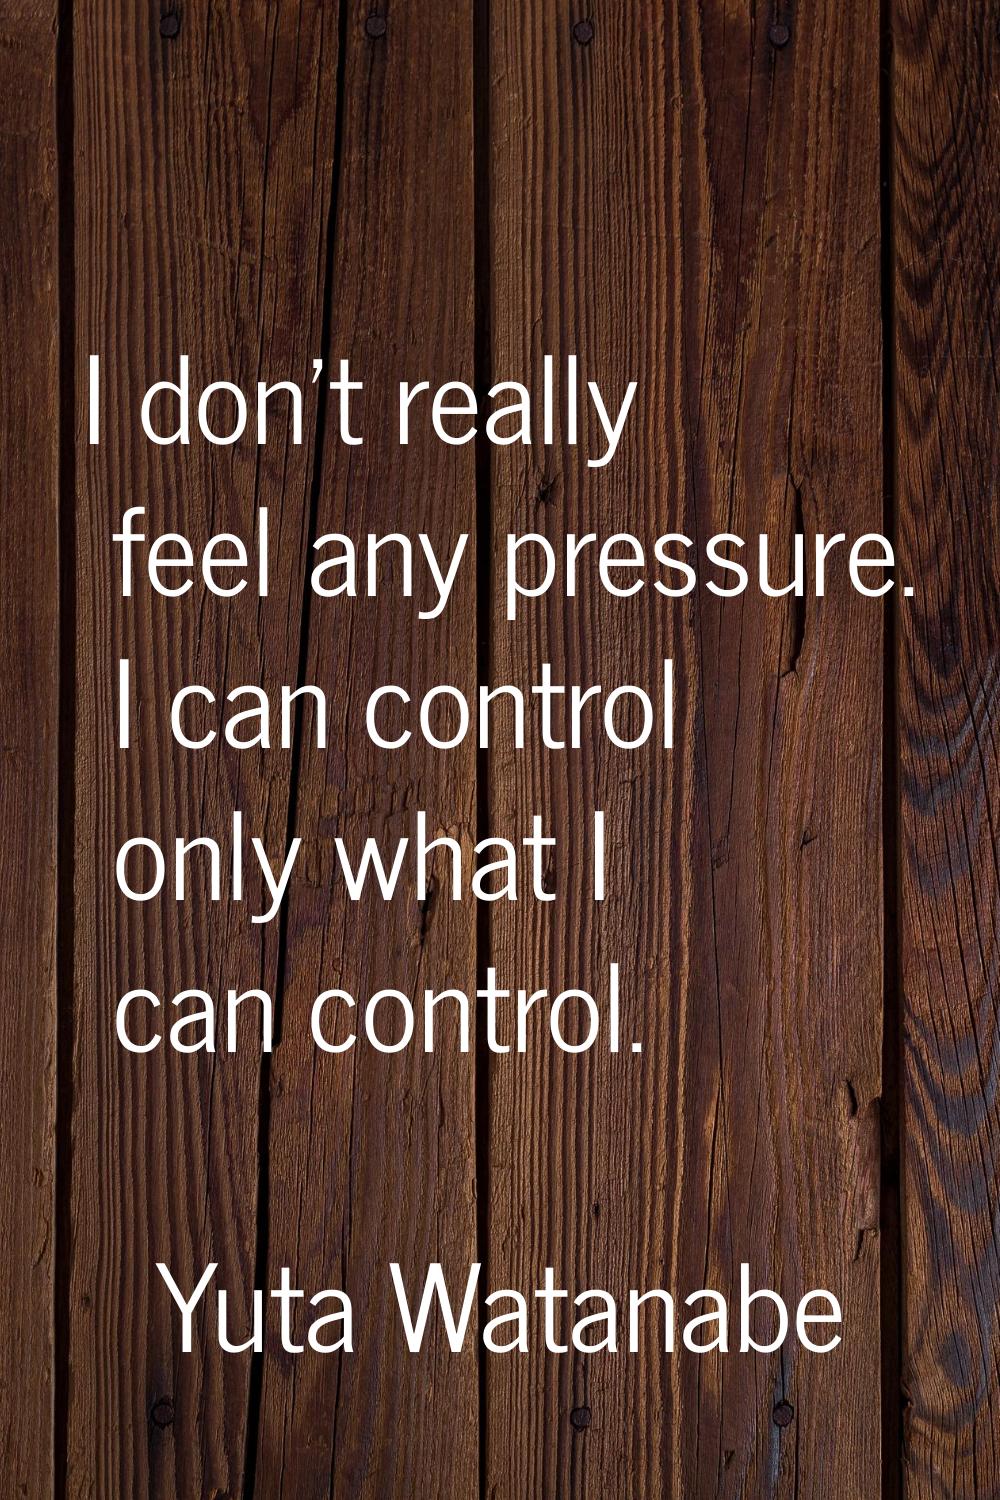 I don't really feel any pressure. I can control only what I can control.